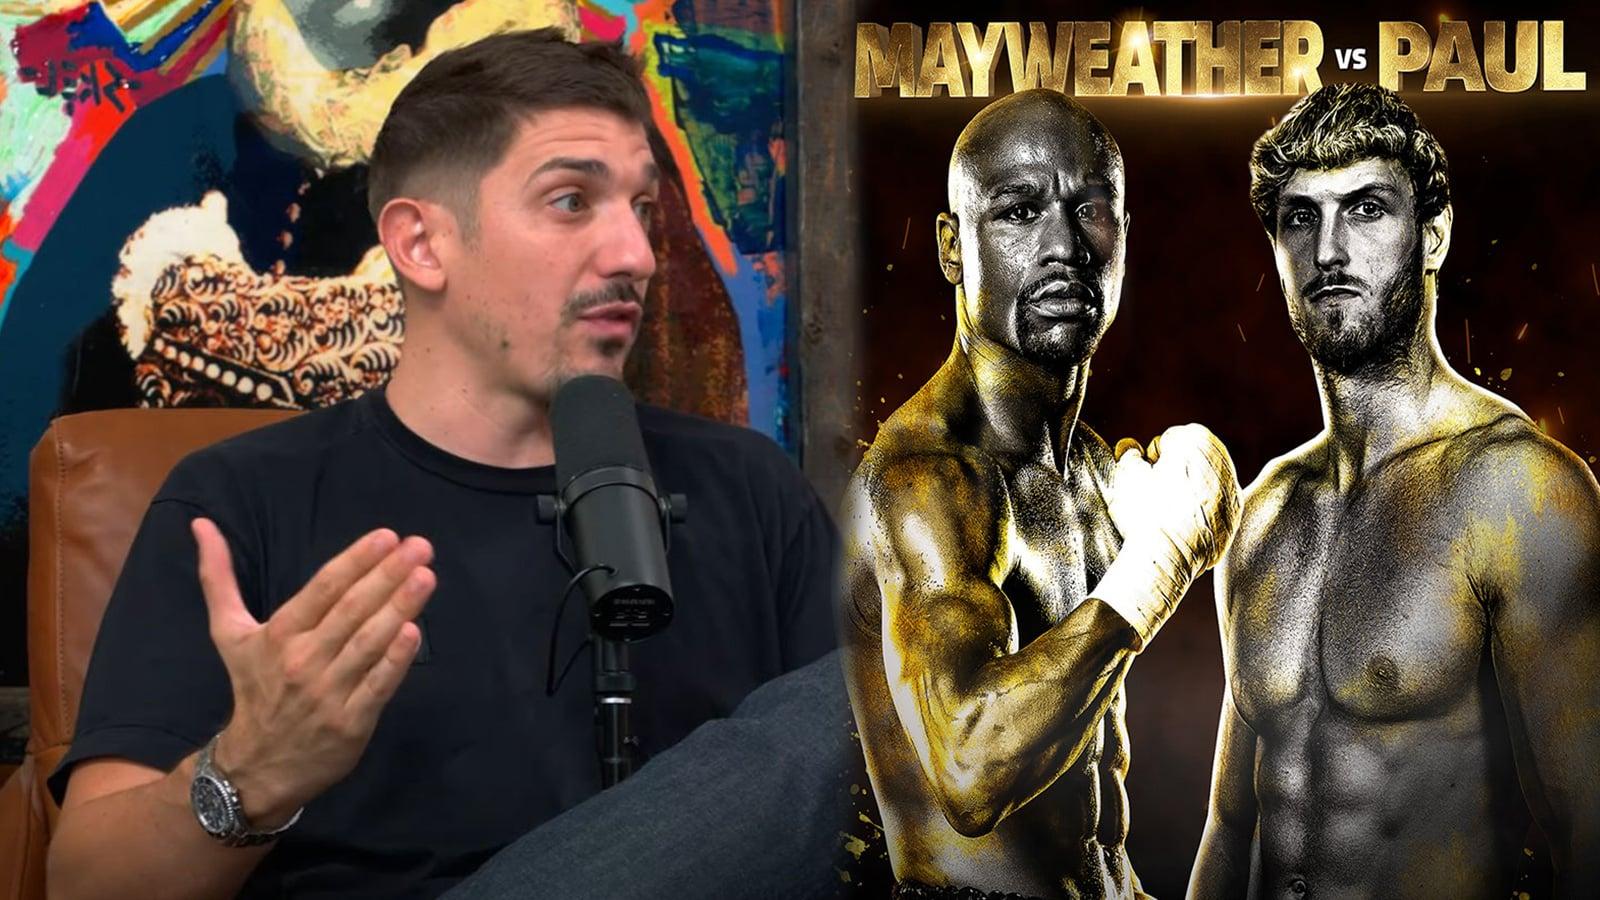 Comedian Andrew Schulz next to Floyd Mayweather vs Logan Paul poster